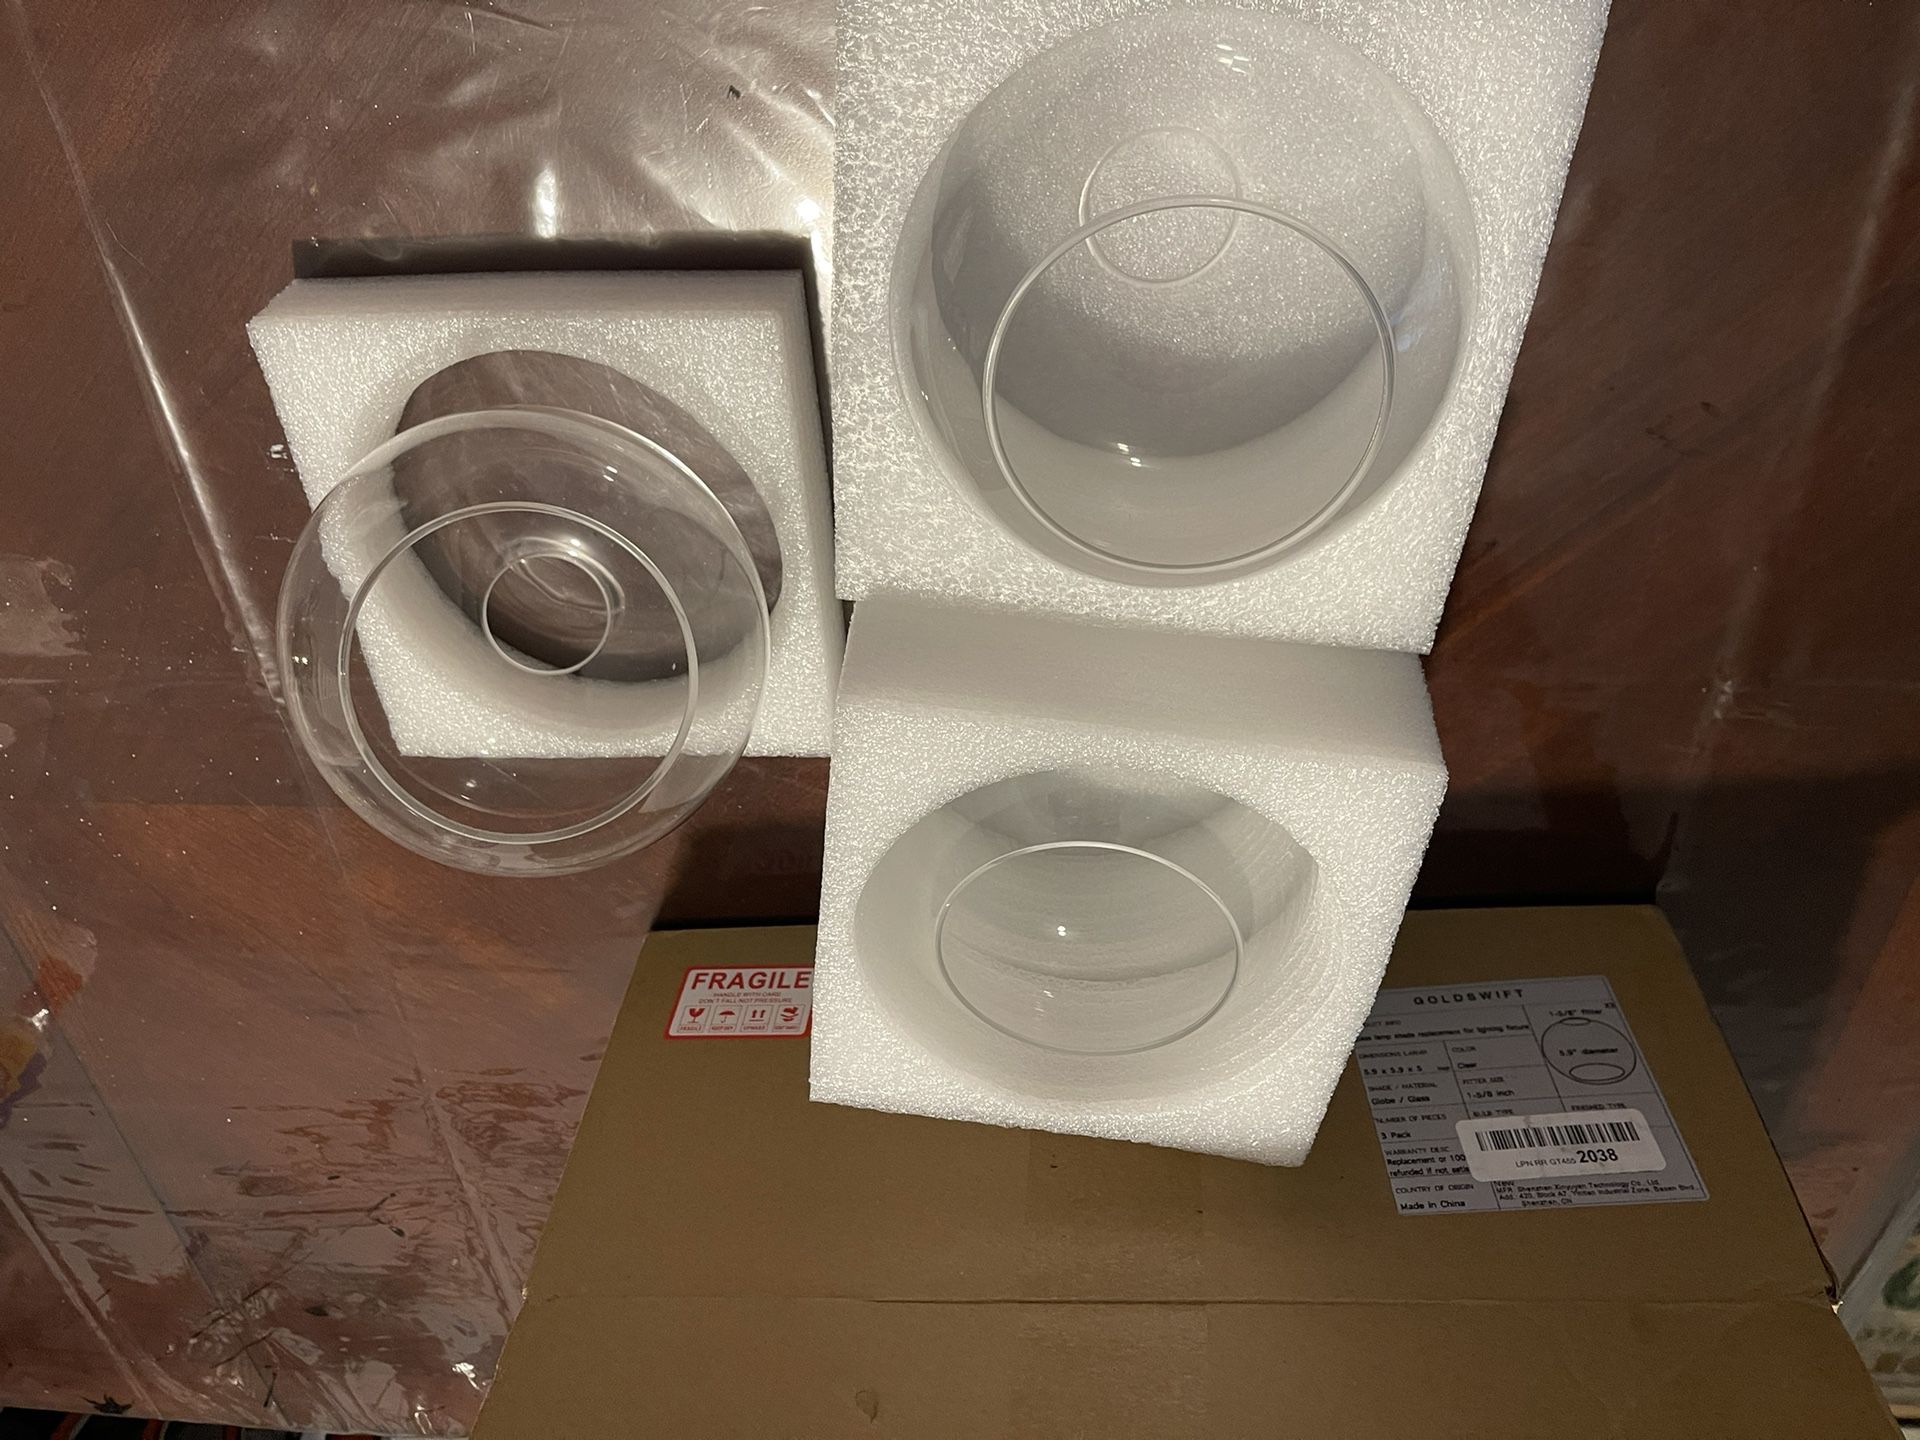 Glass lamp Shade replacement 